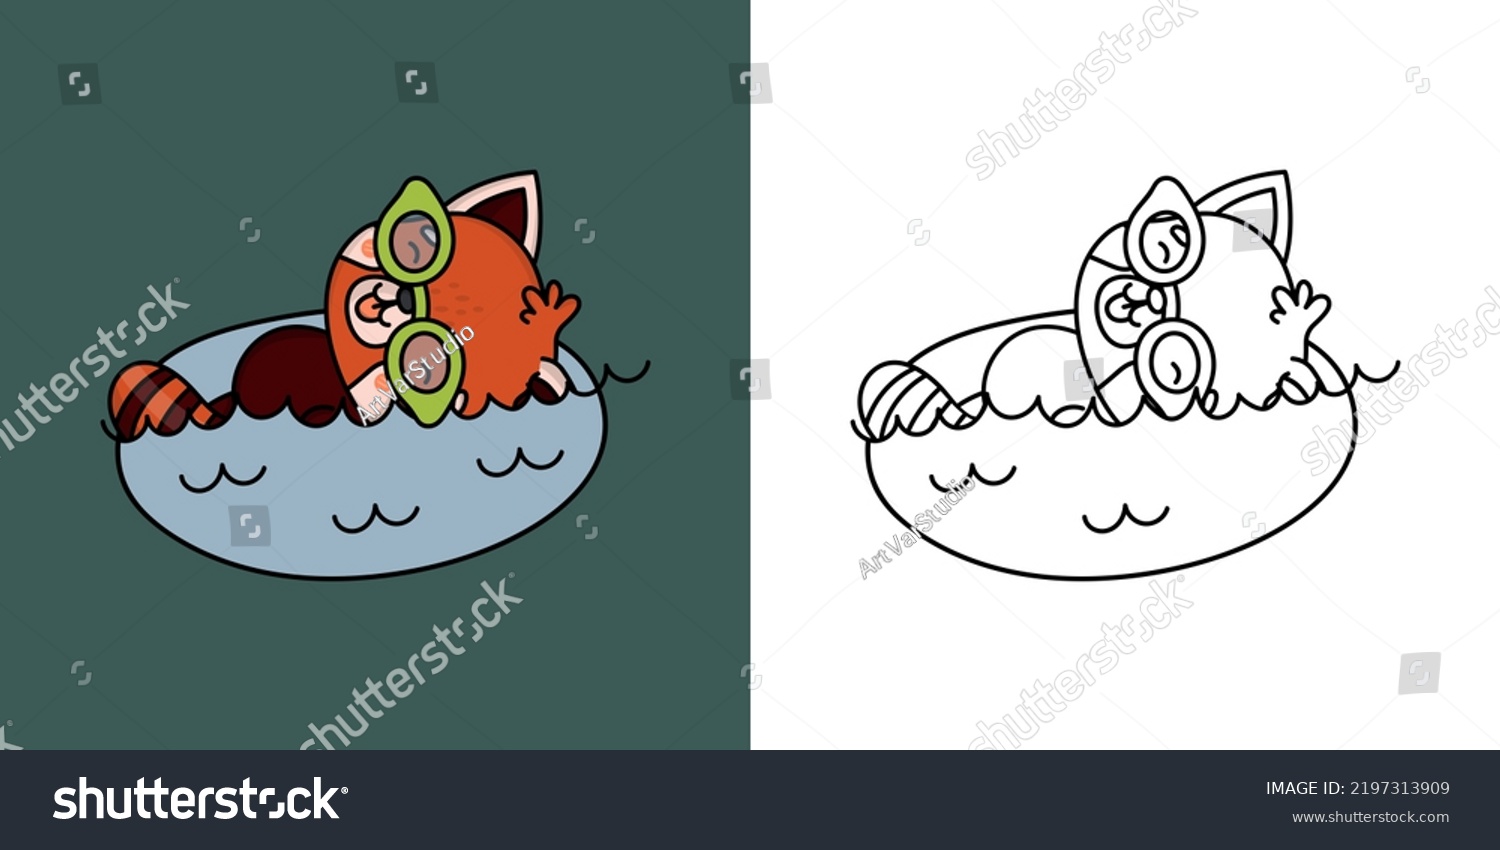 SVG of Red Panda Sportsman Clipart Multicolored and Black and White. Beautiful Animal Sportsman. Vector Illustration of a Kawaii Animal for Prints for Clothes, Stickers, Baby Shower, Coloring Pages.
 svg